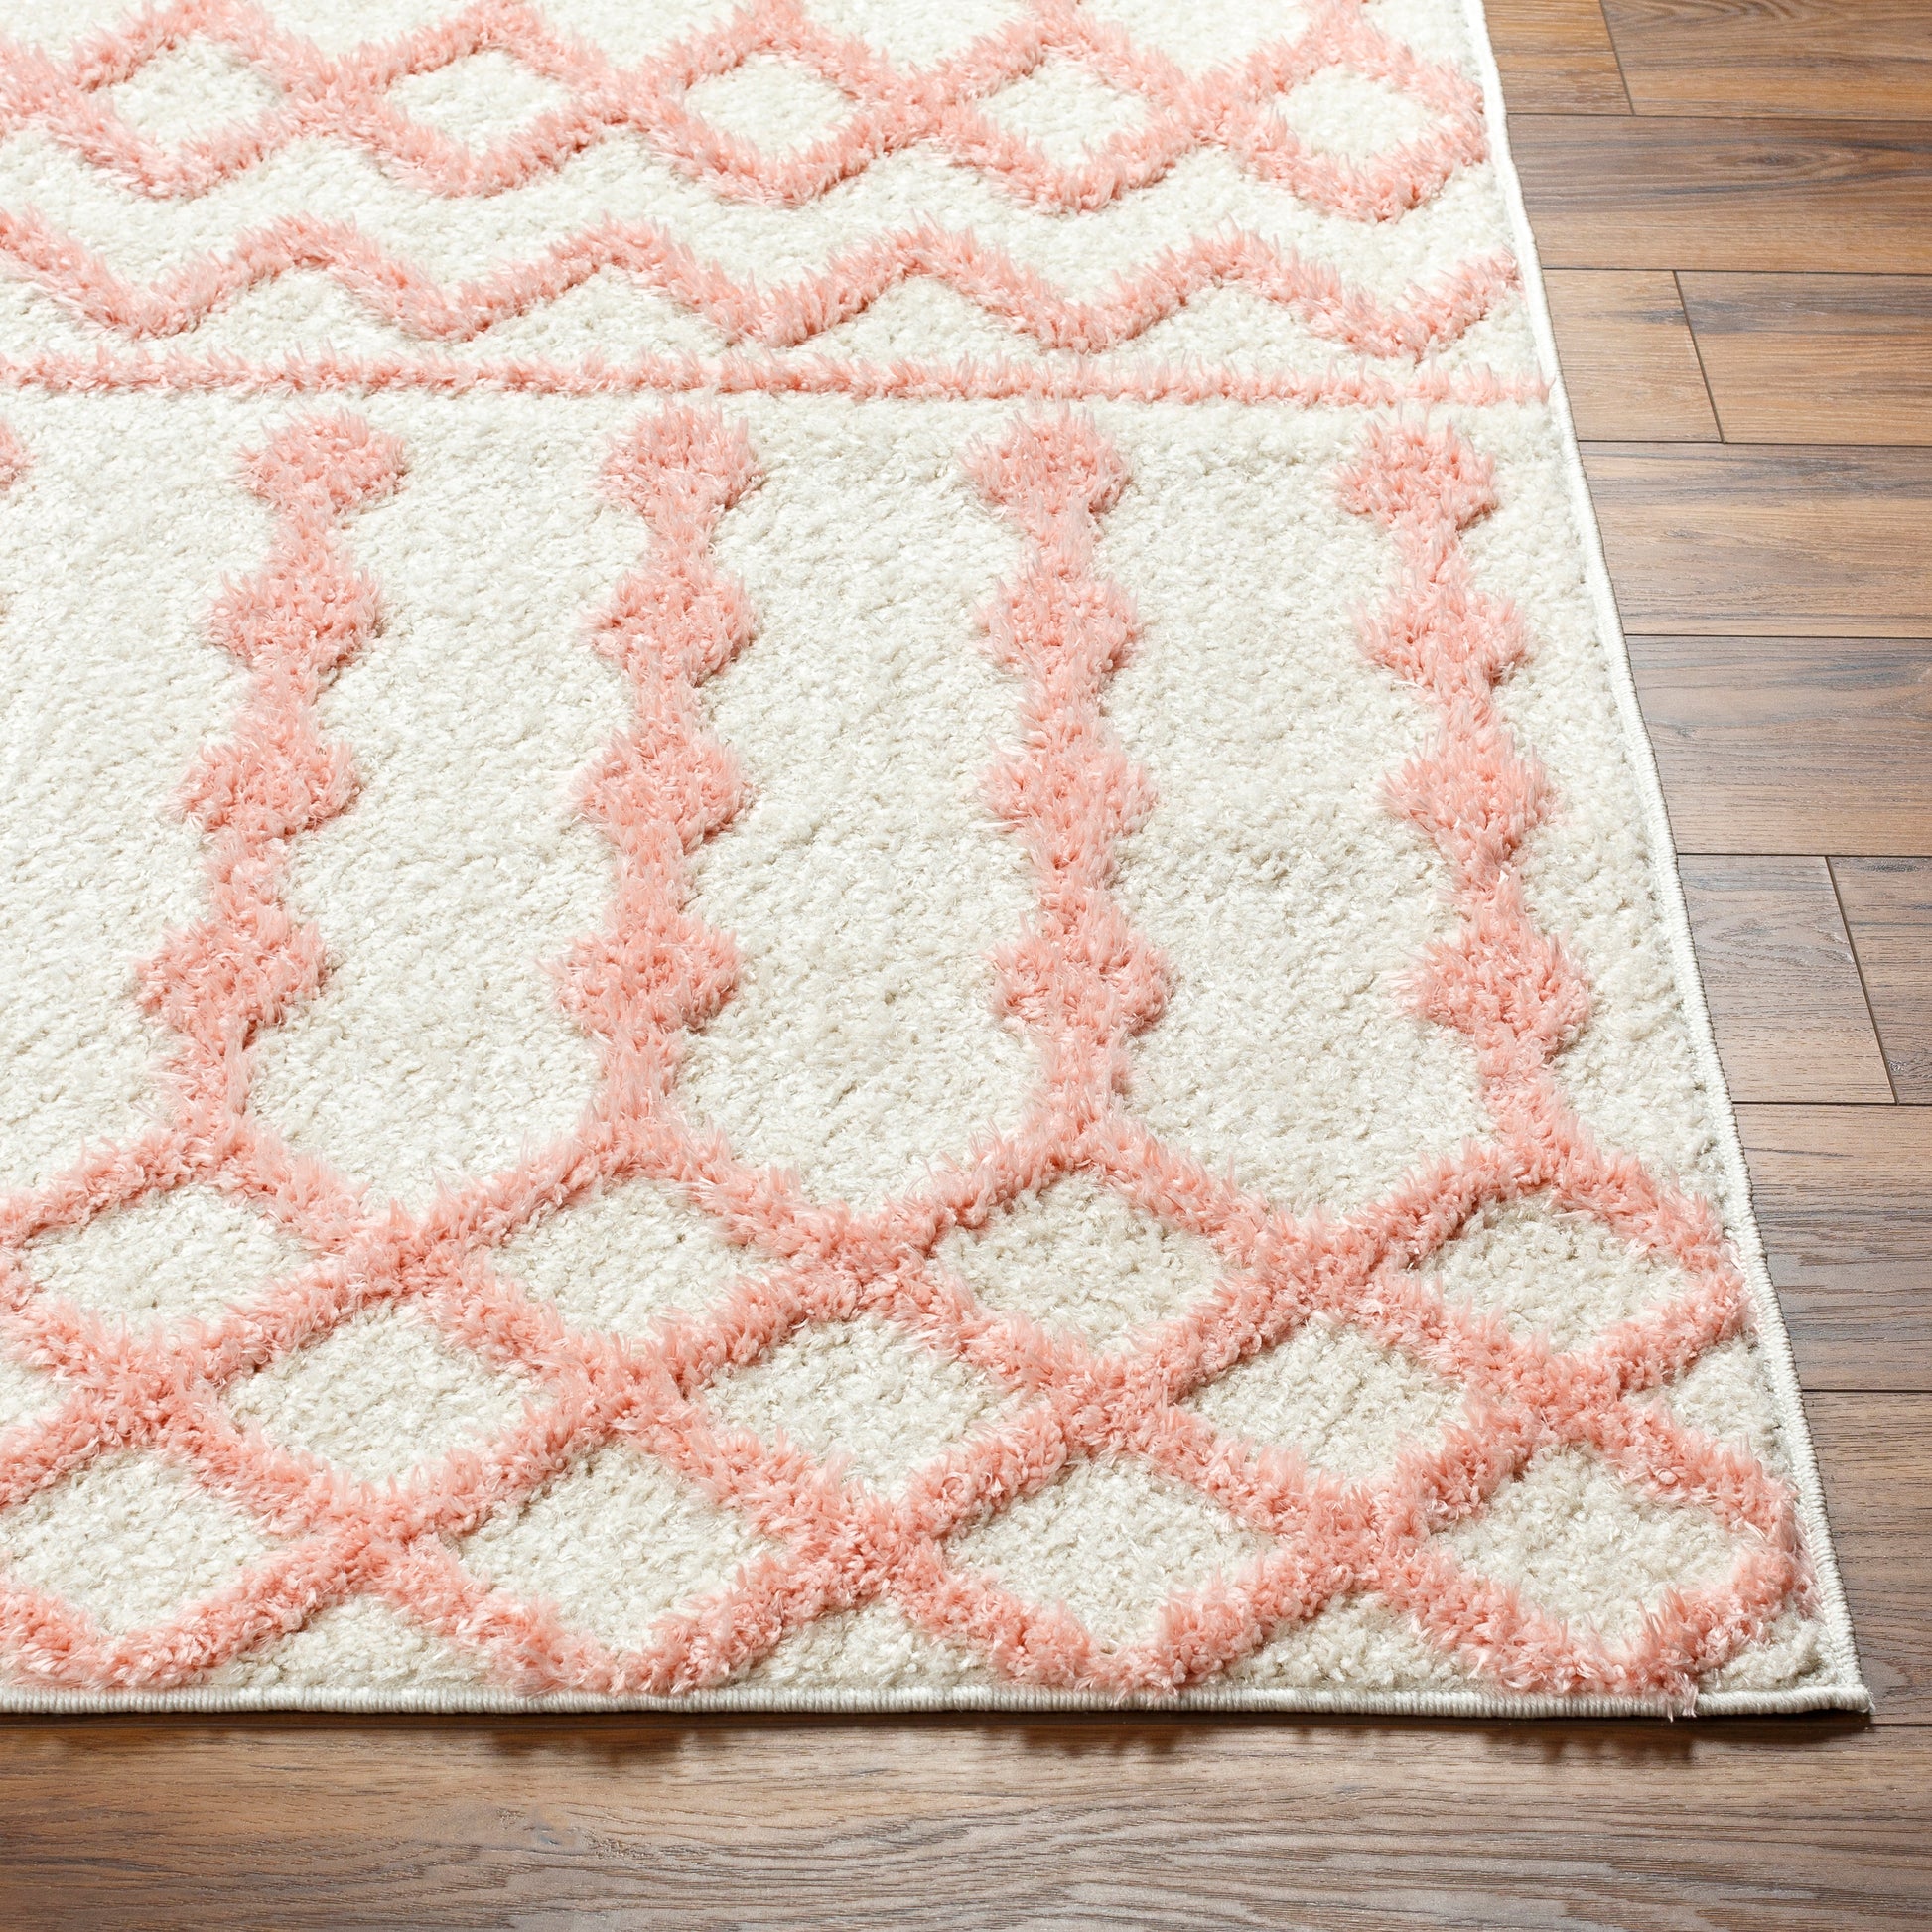 Surya Rodos Rdo-2344 Off-White, Pearl, Pale Pink Area Rug